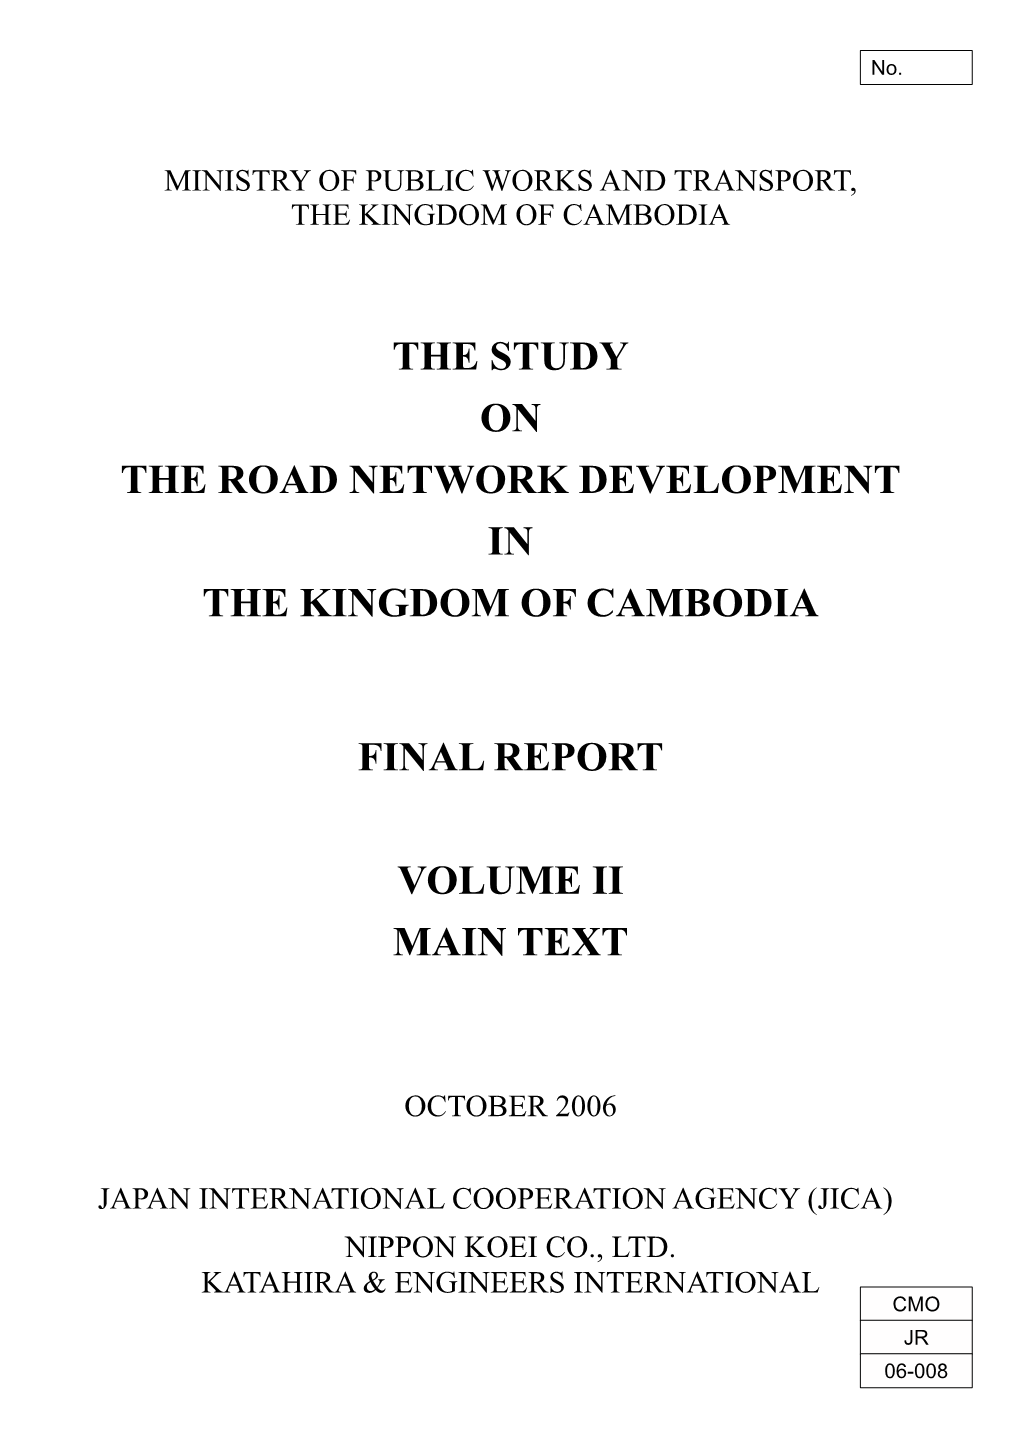 The Study on the Road Network Development in the Kingdom of Cambodia